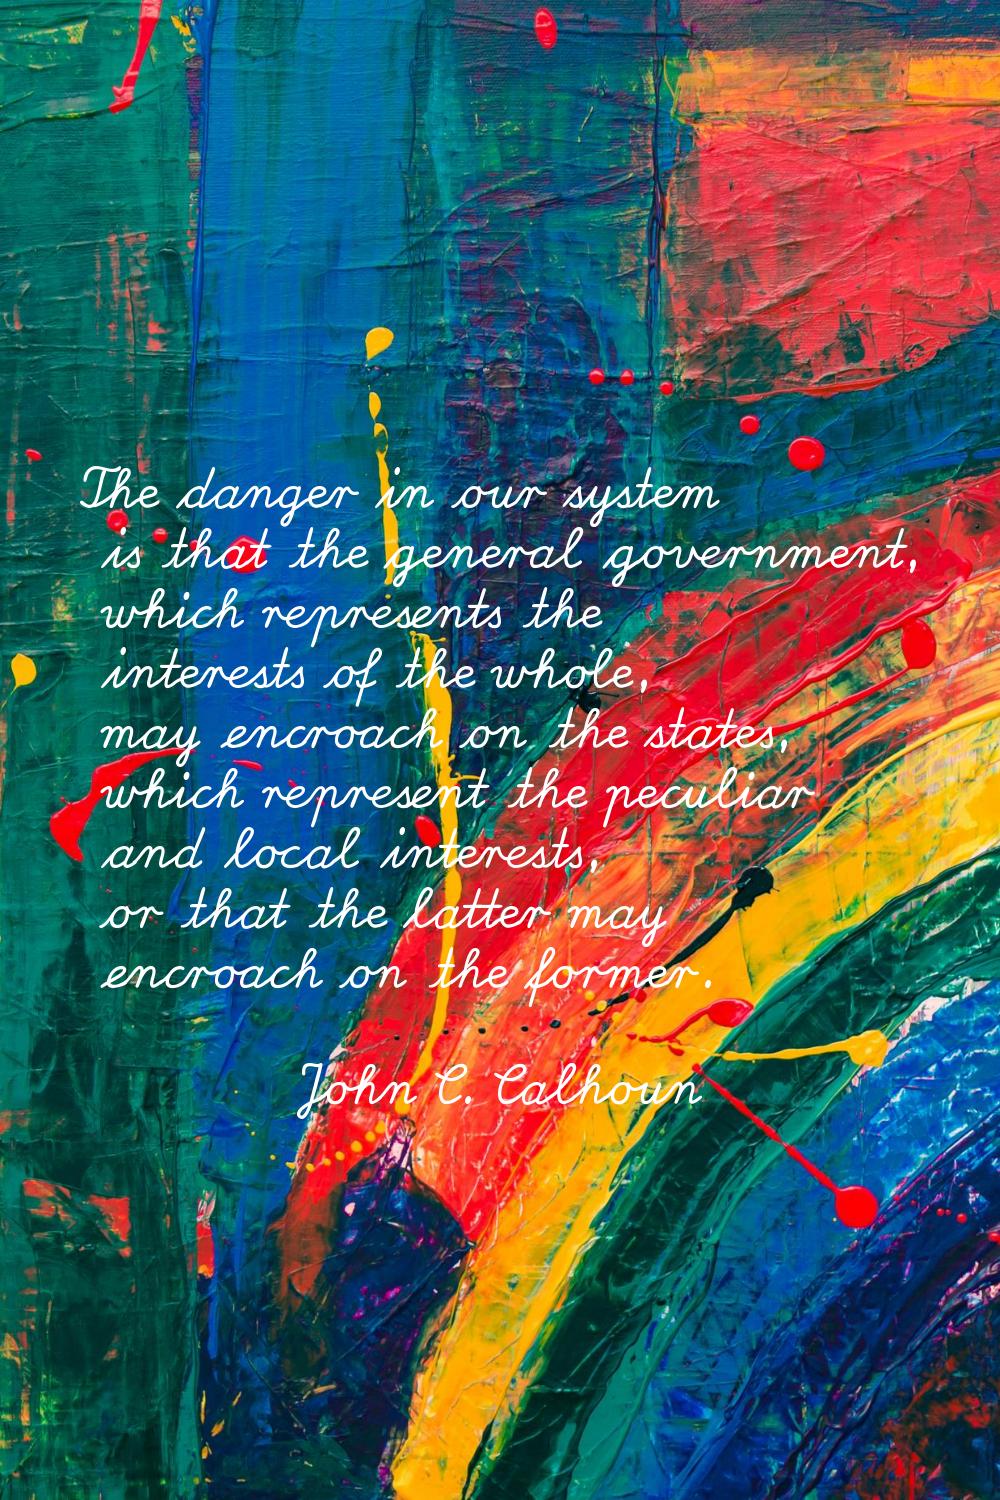 The danger in our system is that the general government, which represents the interests of the whol